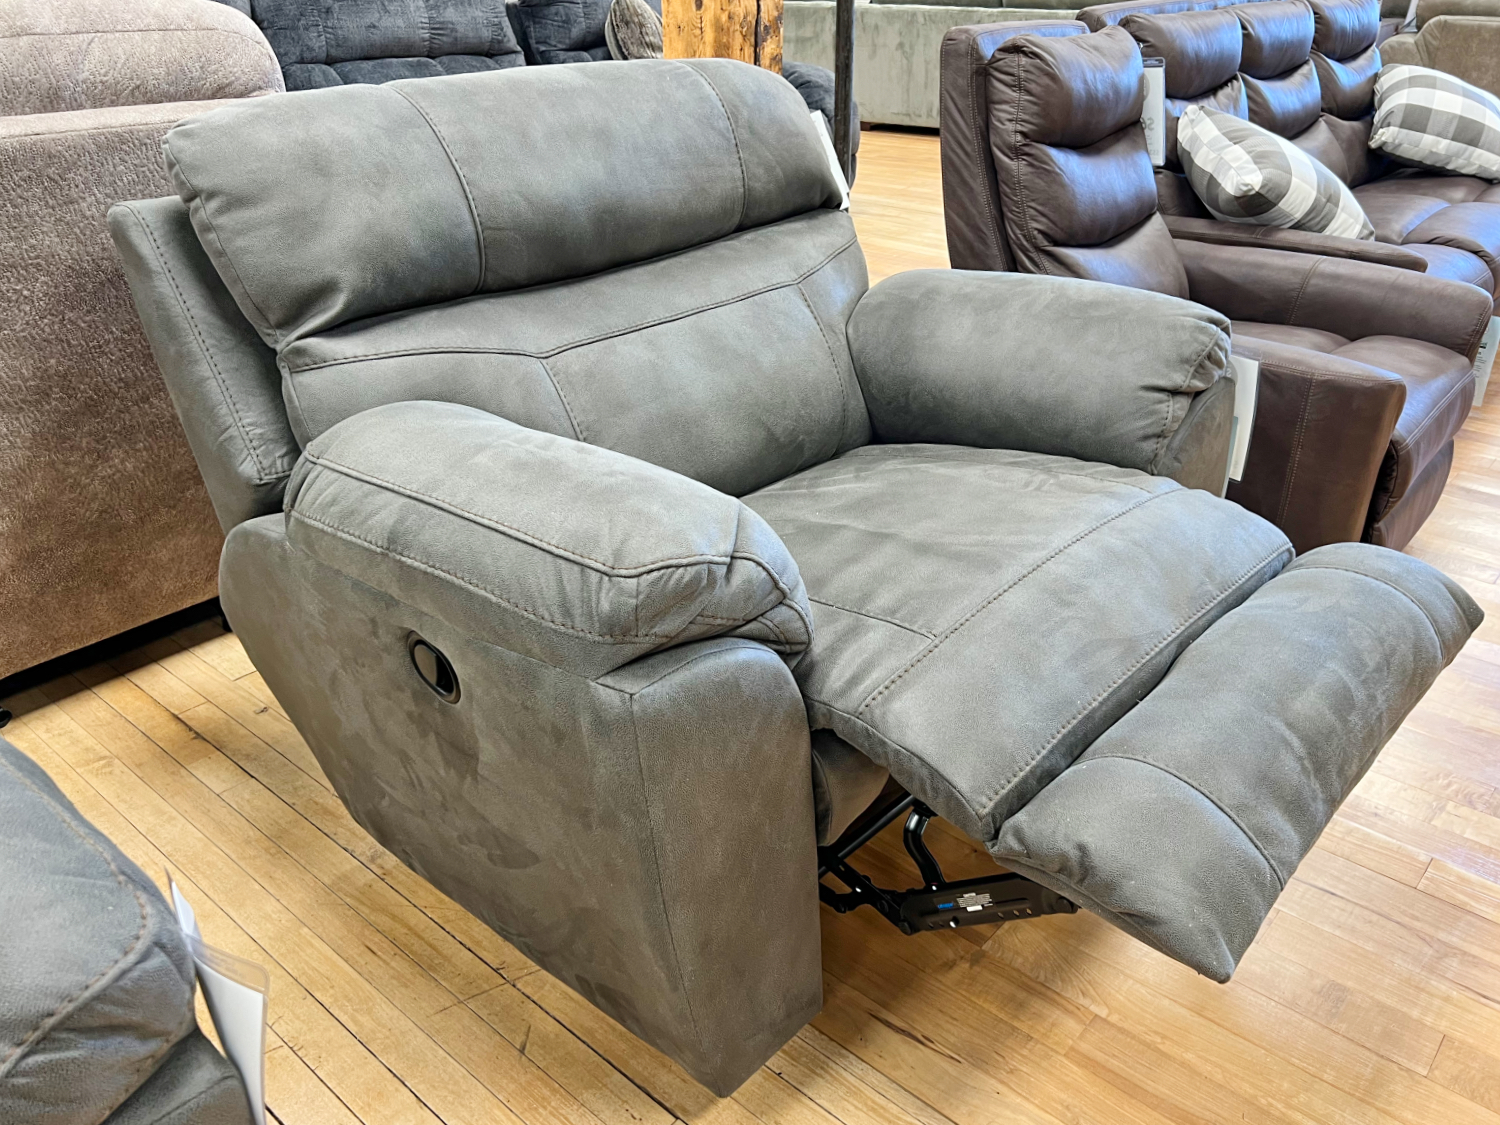 suede-look reclining armchair in the stock room discount furniture warehouse in rockford, il